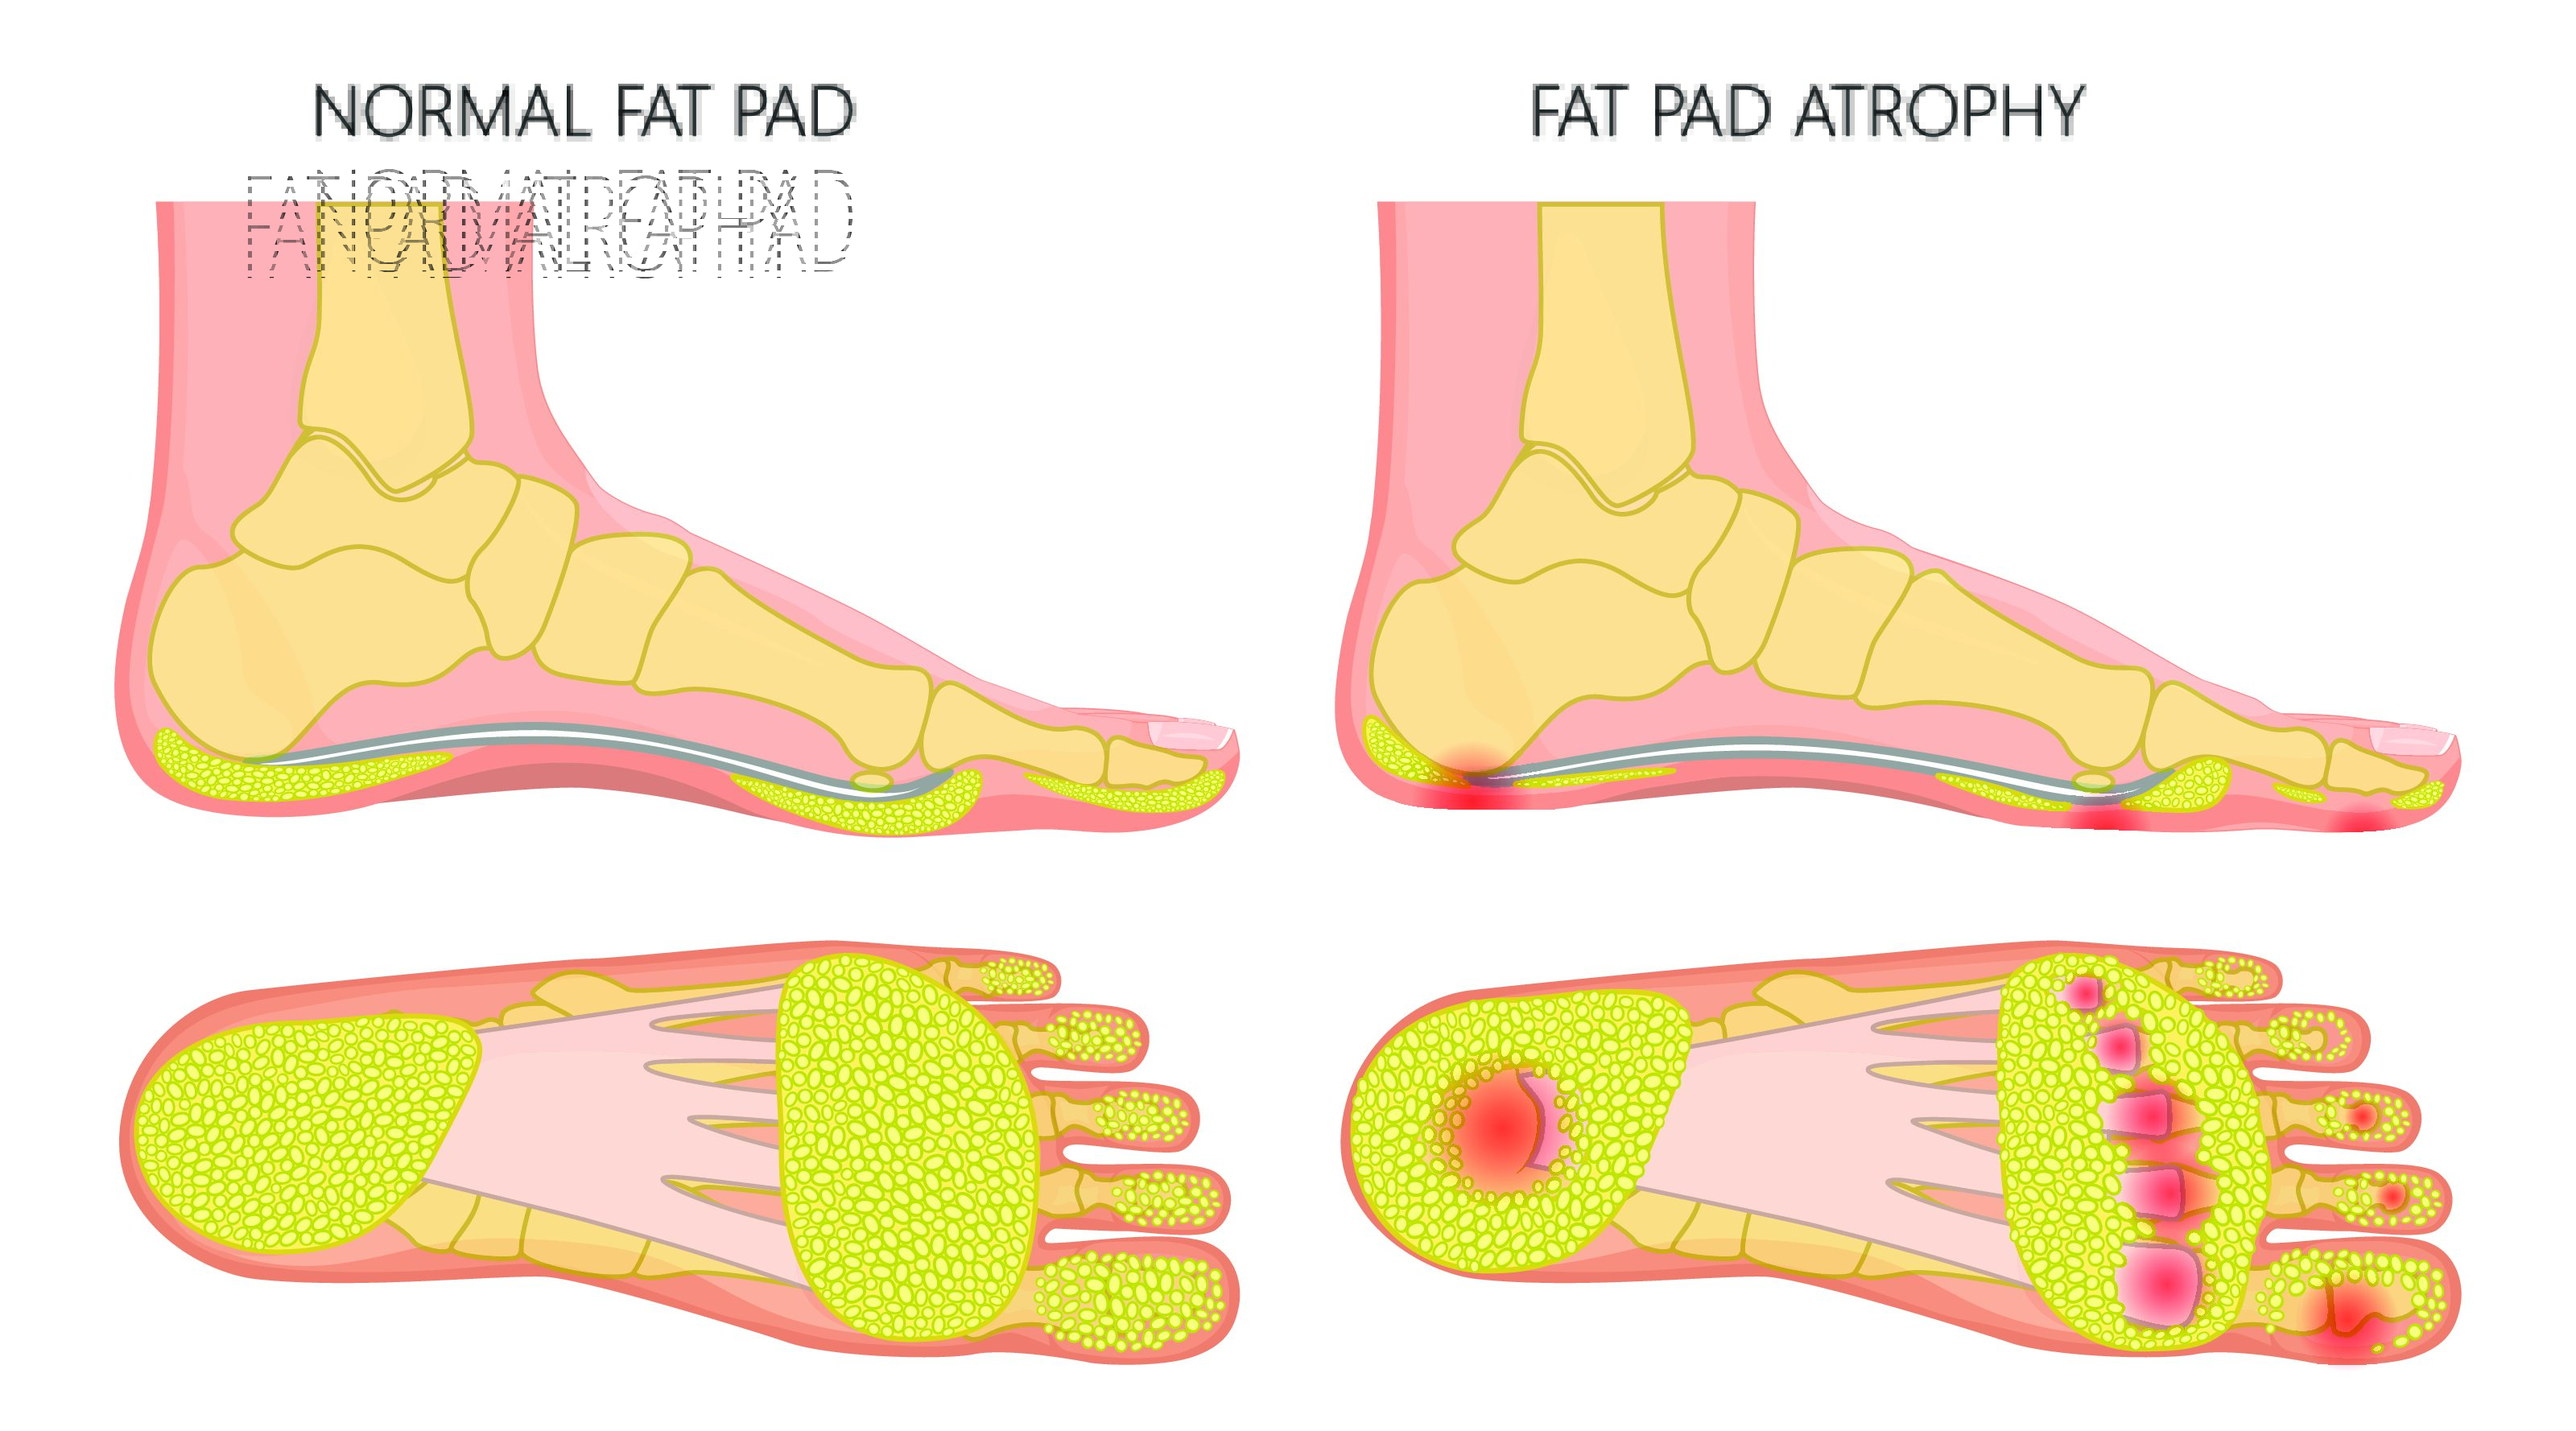 Can You Treat Fat Pad Atrophy With Orthotics? - Upstep Answers